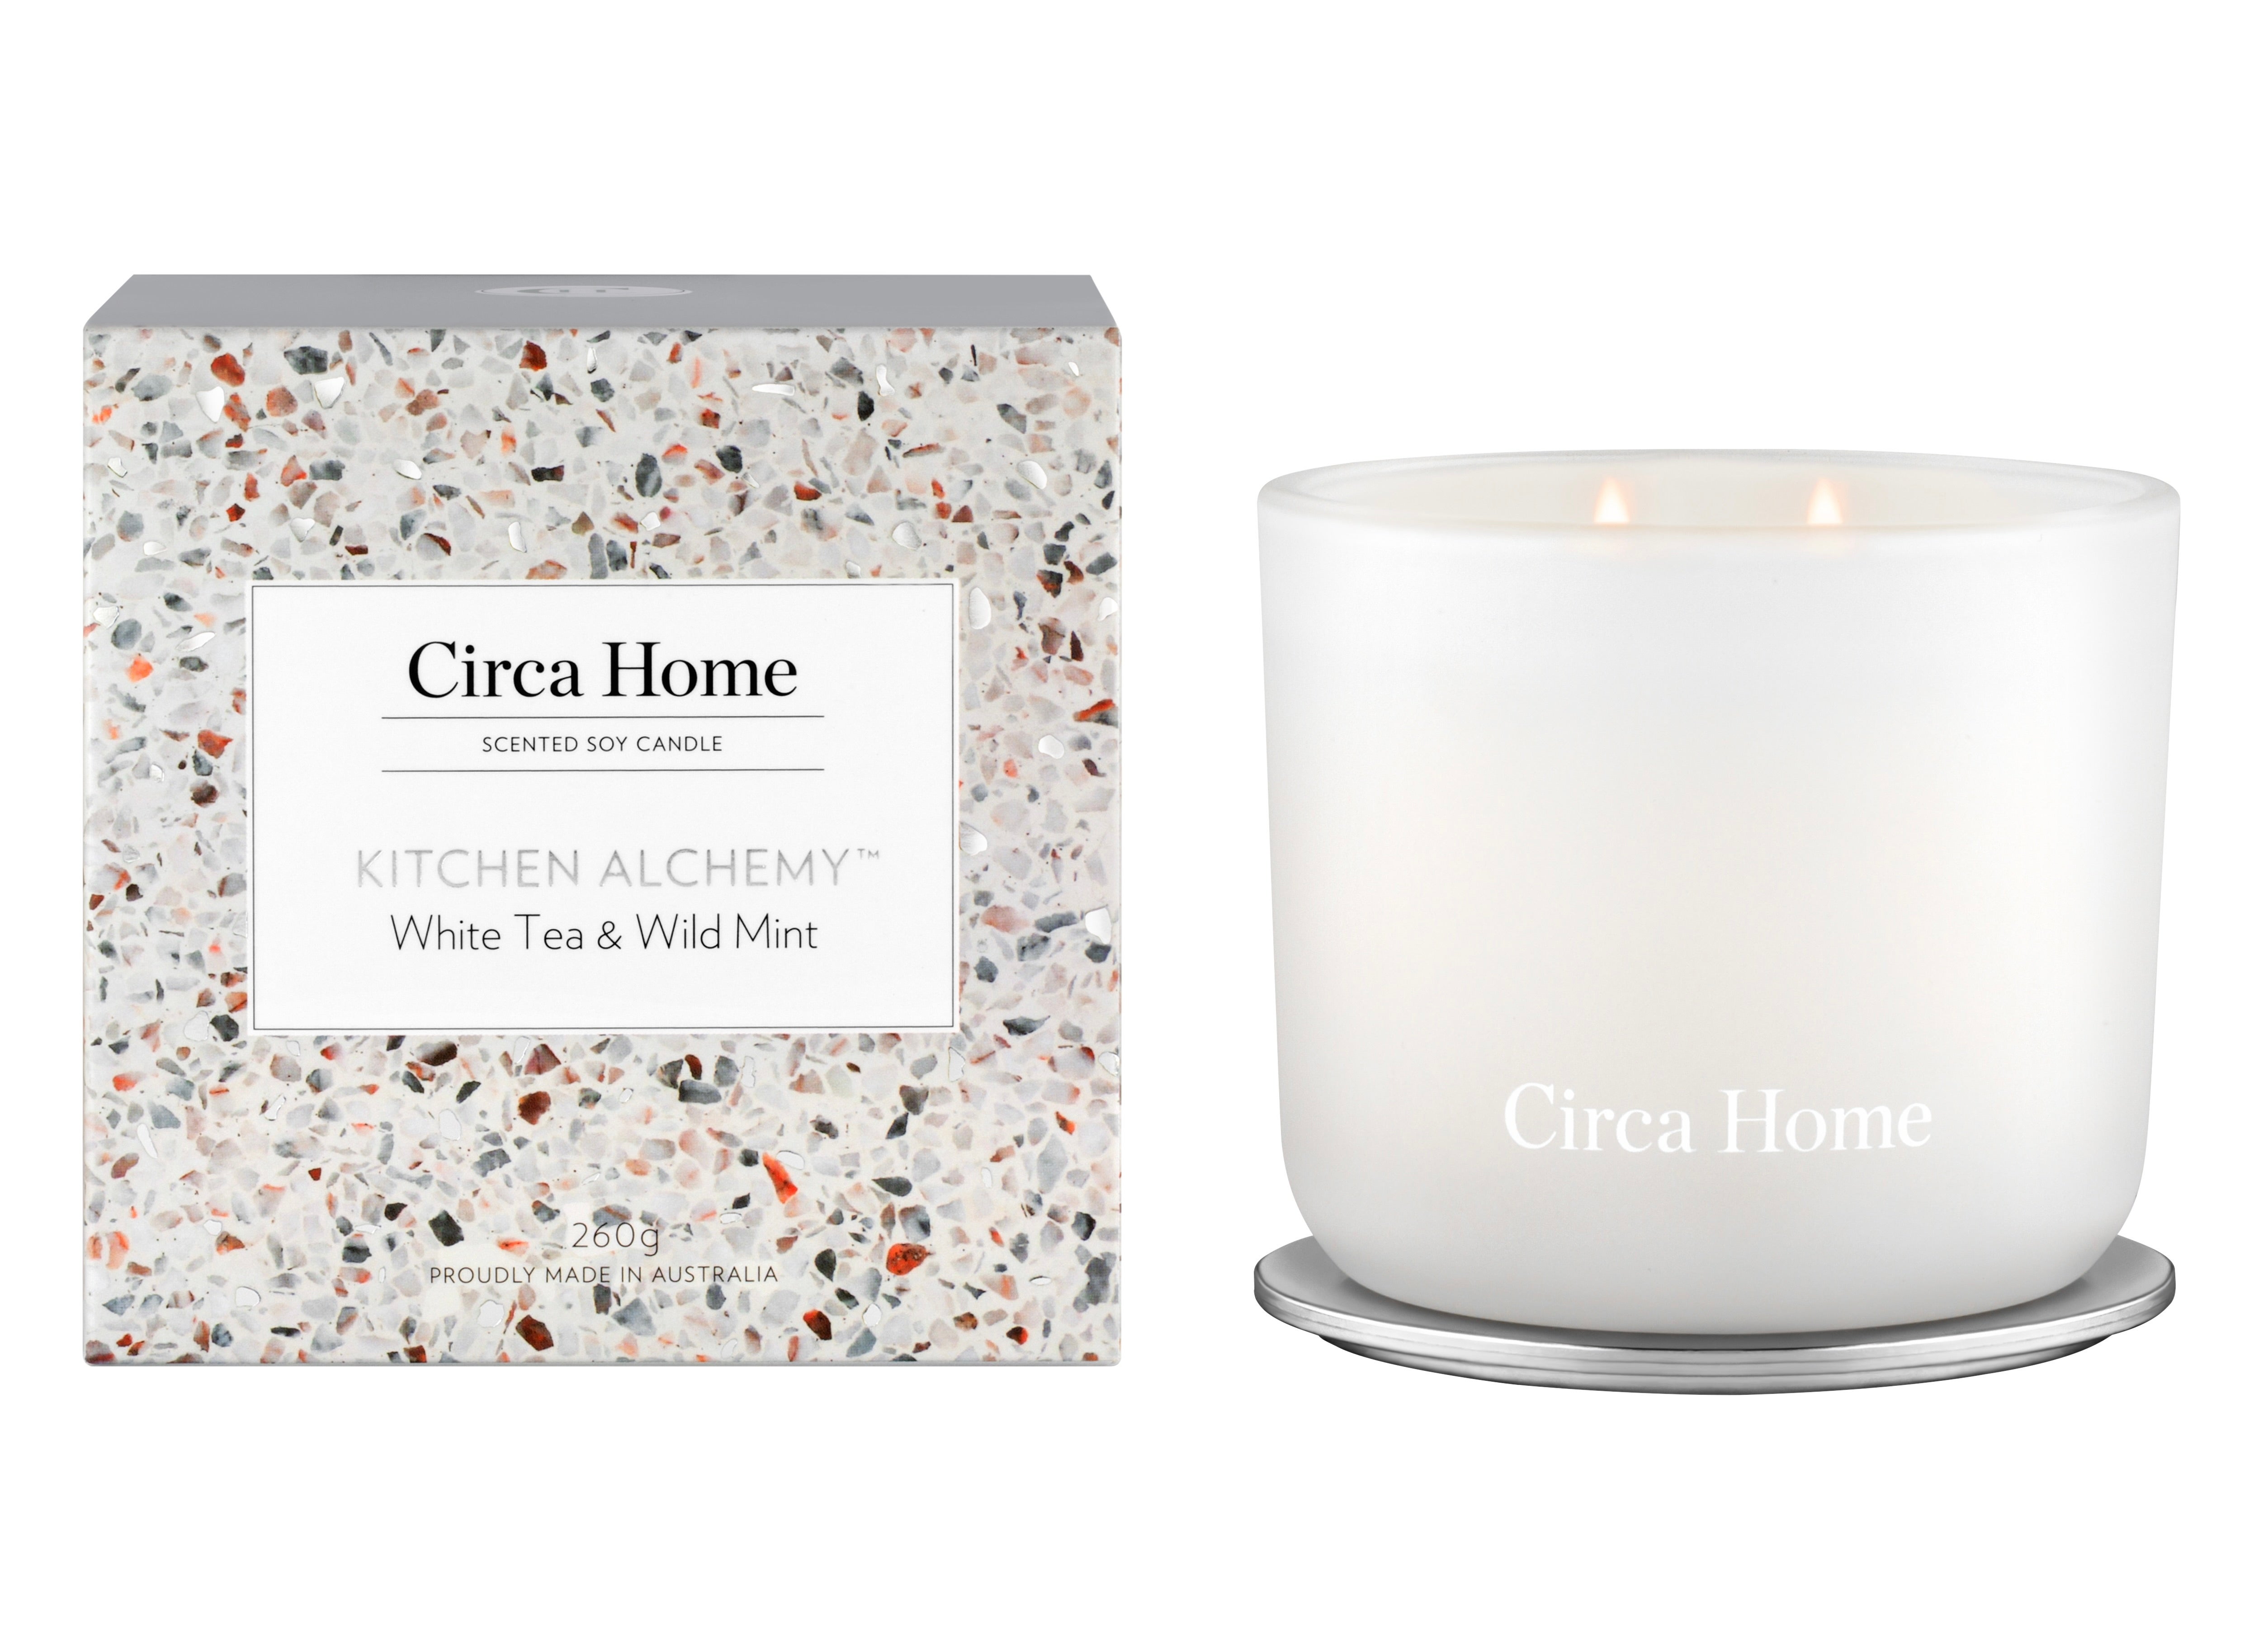 Circa Home Kitchen Alchemy White Tea & Wild Mint Classic Scented Soy Candle 260g